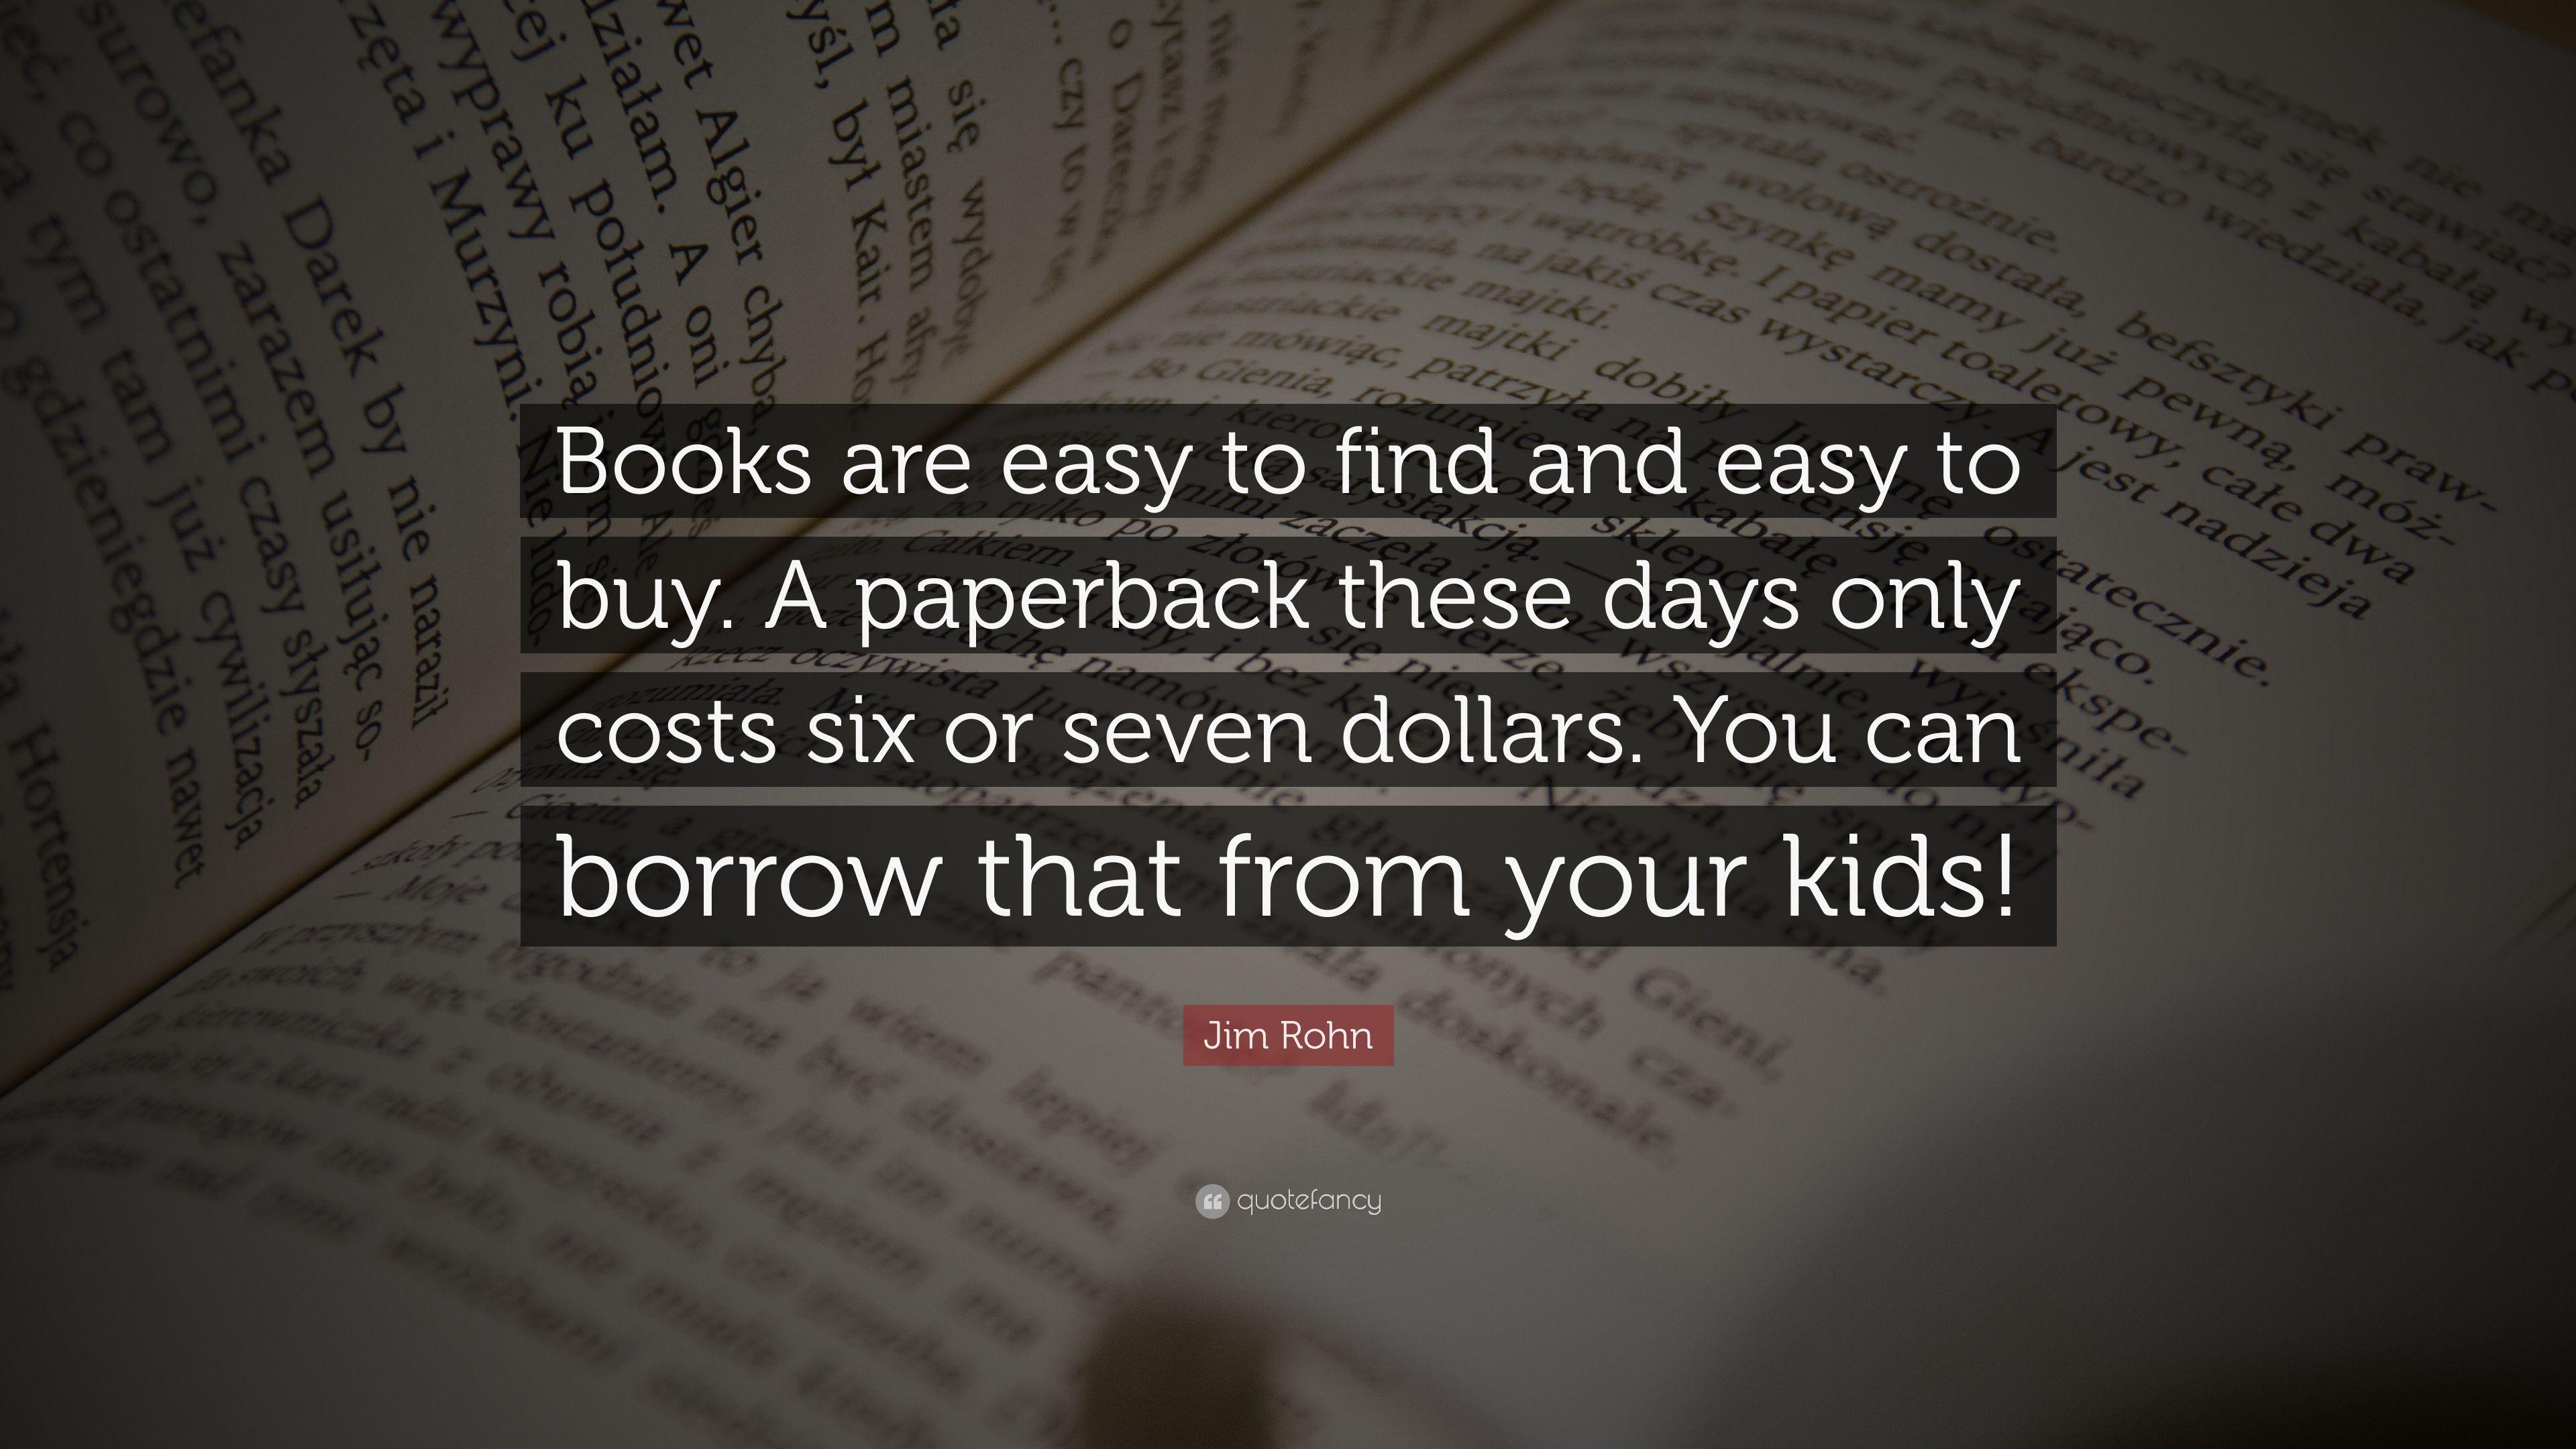 Jim Rohn Quote: “Books are easy to find and easy to buy. A paperback